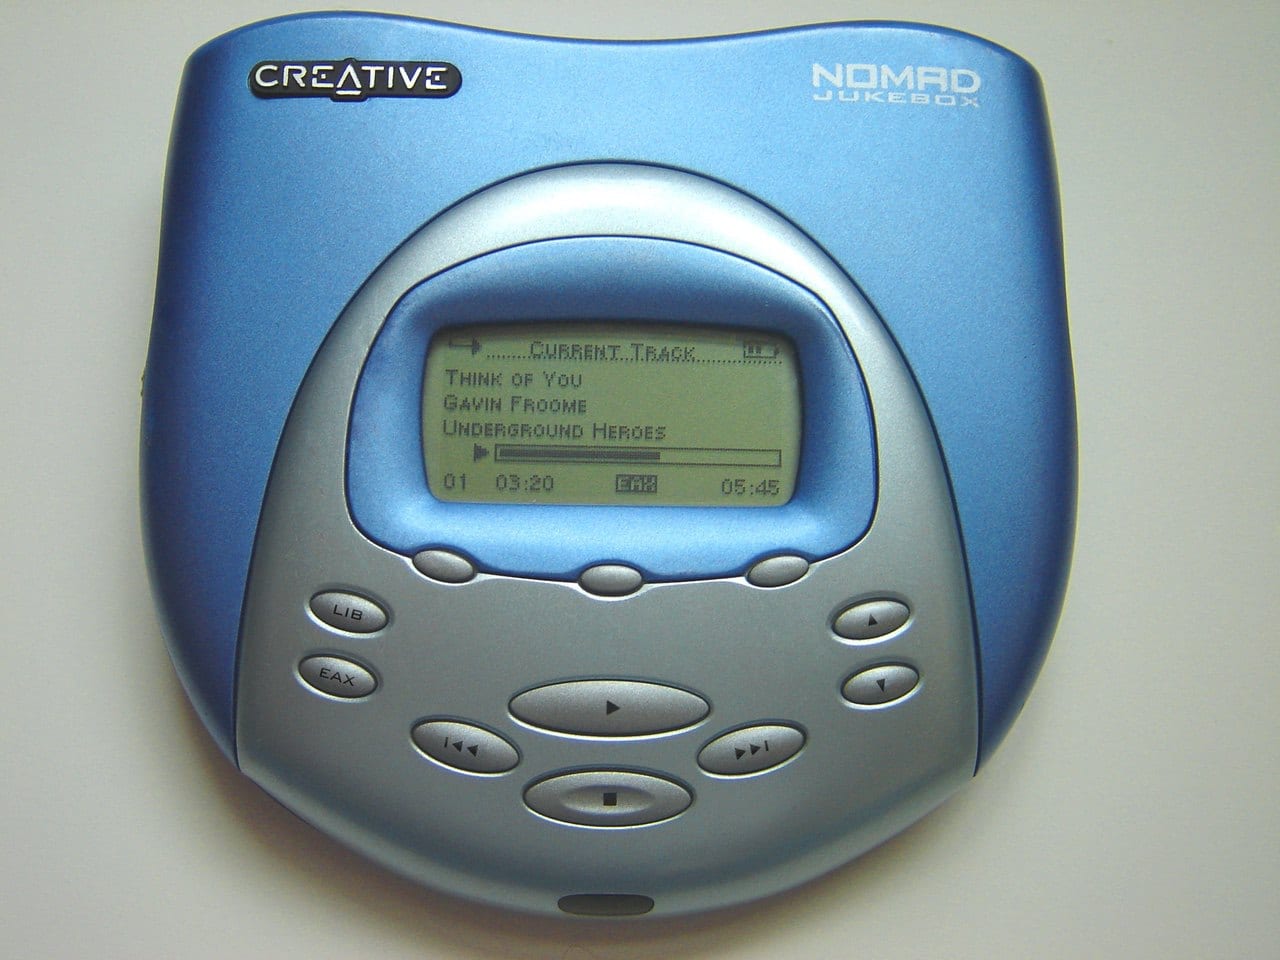 A Creative Labs NOMAD Jukebox, the dismal state-of-the-art in digital music players a year before the iPod appeared